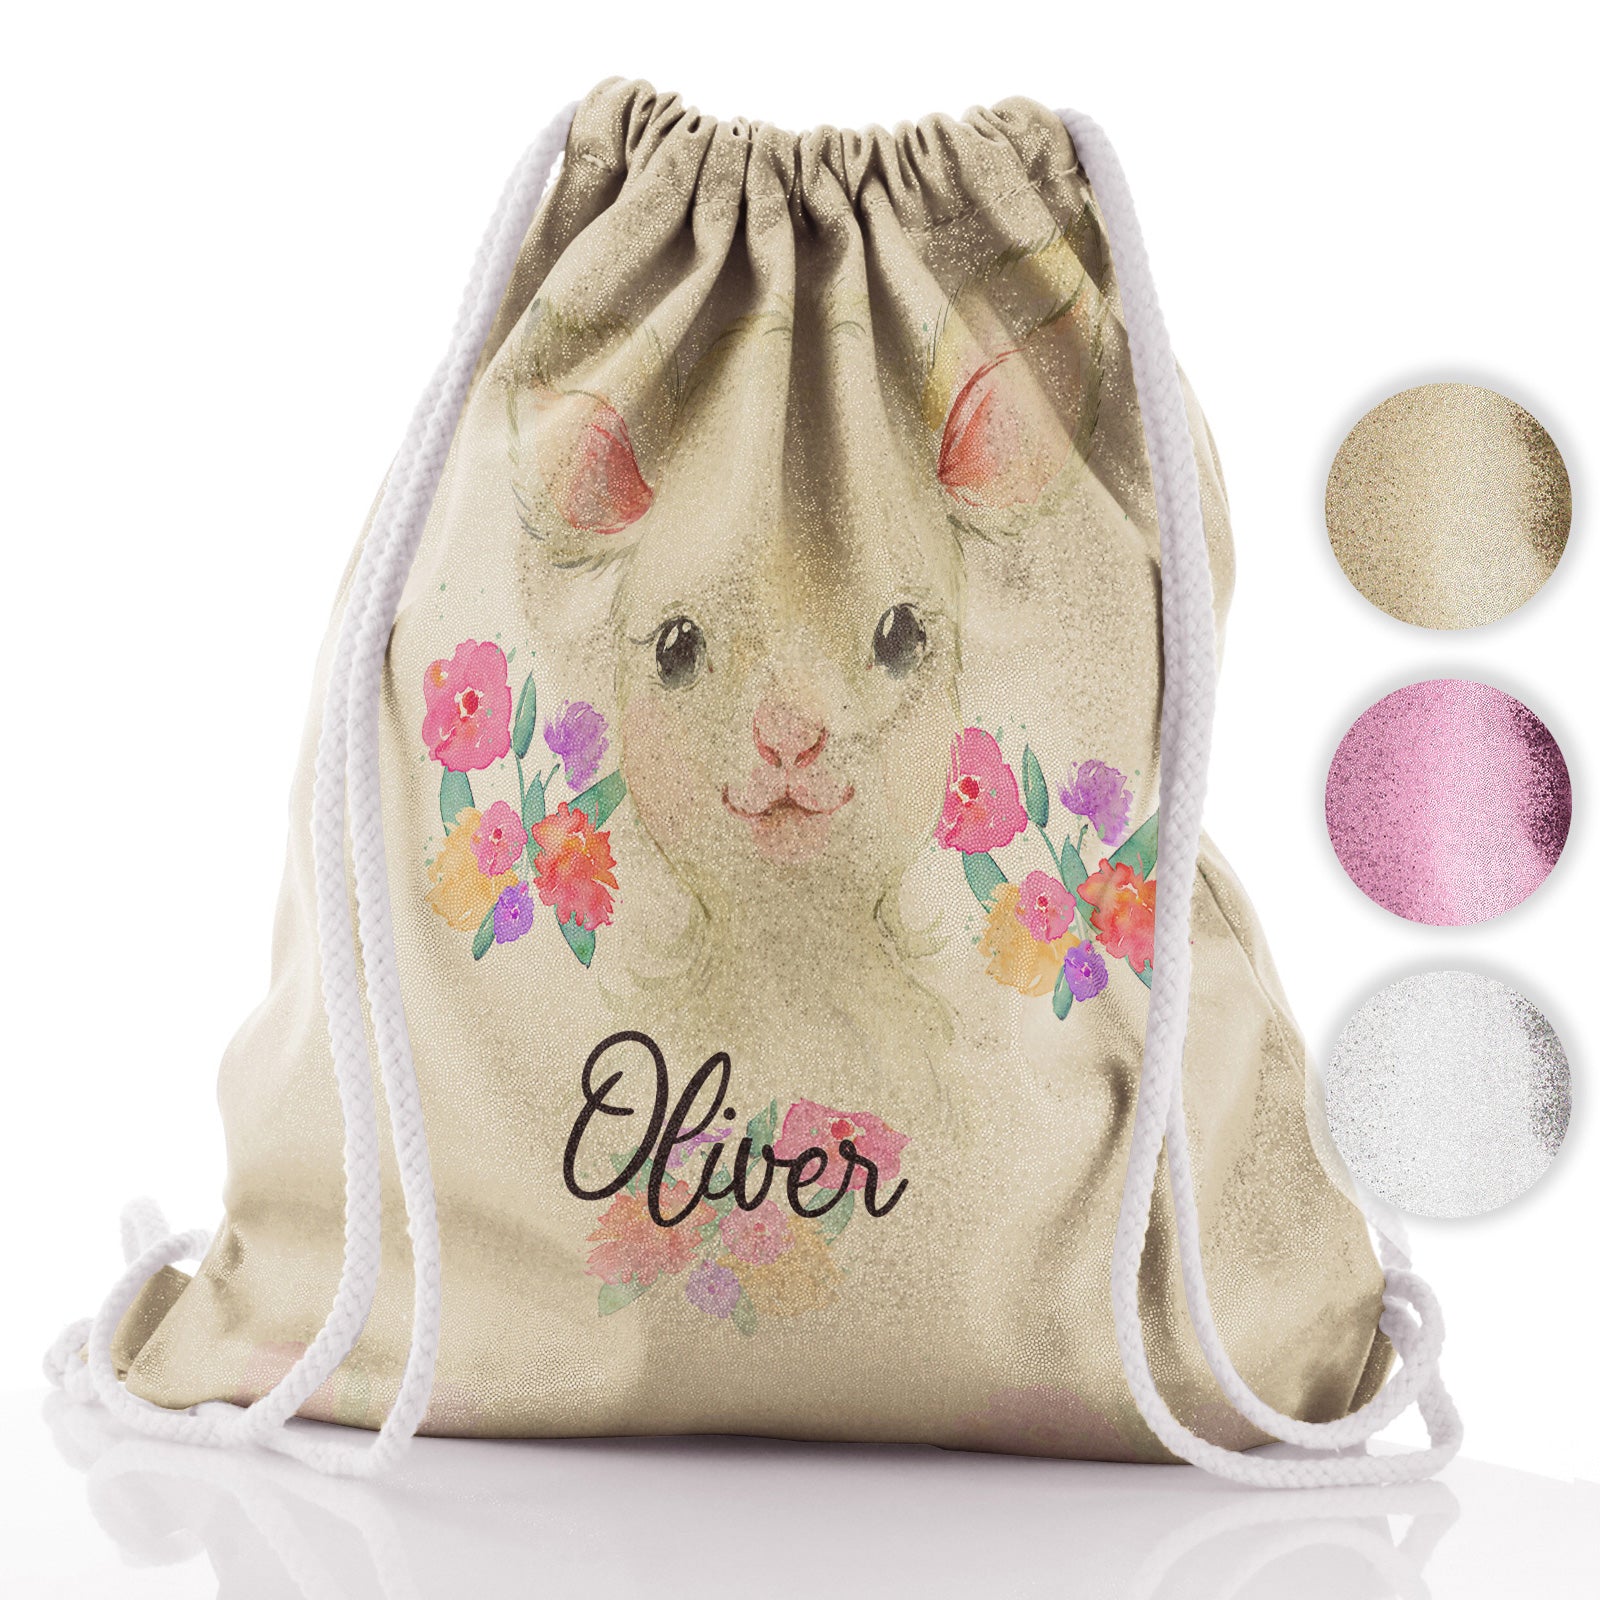 Personalised Glitter Drawstring Backpack with White Lamb Flowers and Cute Text